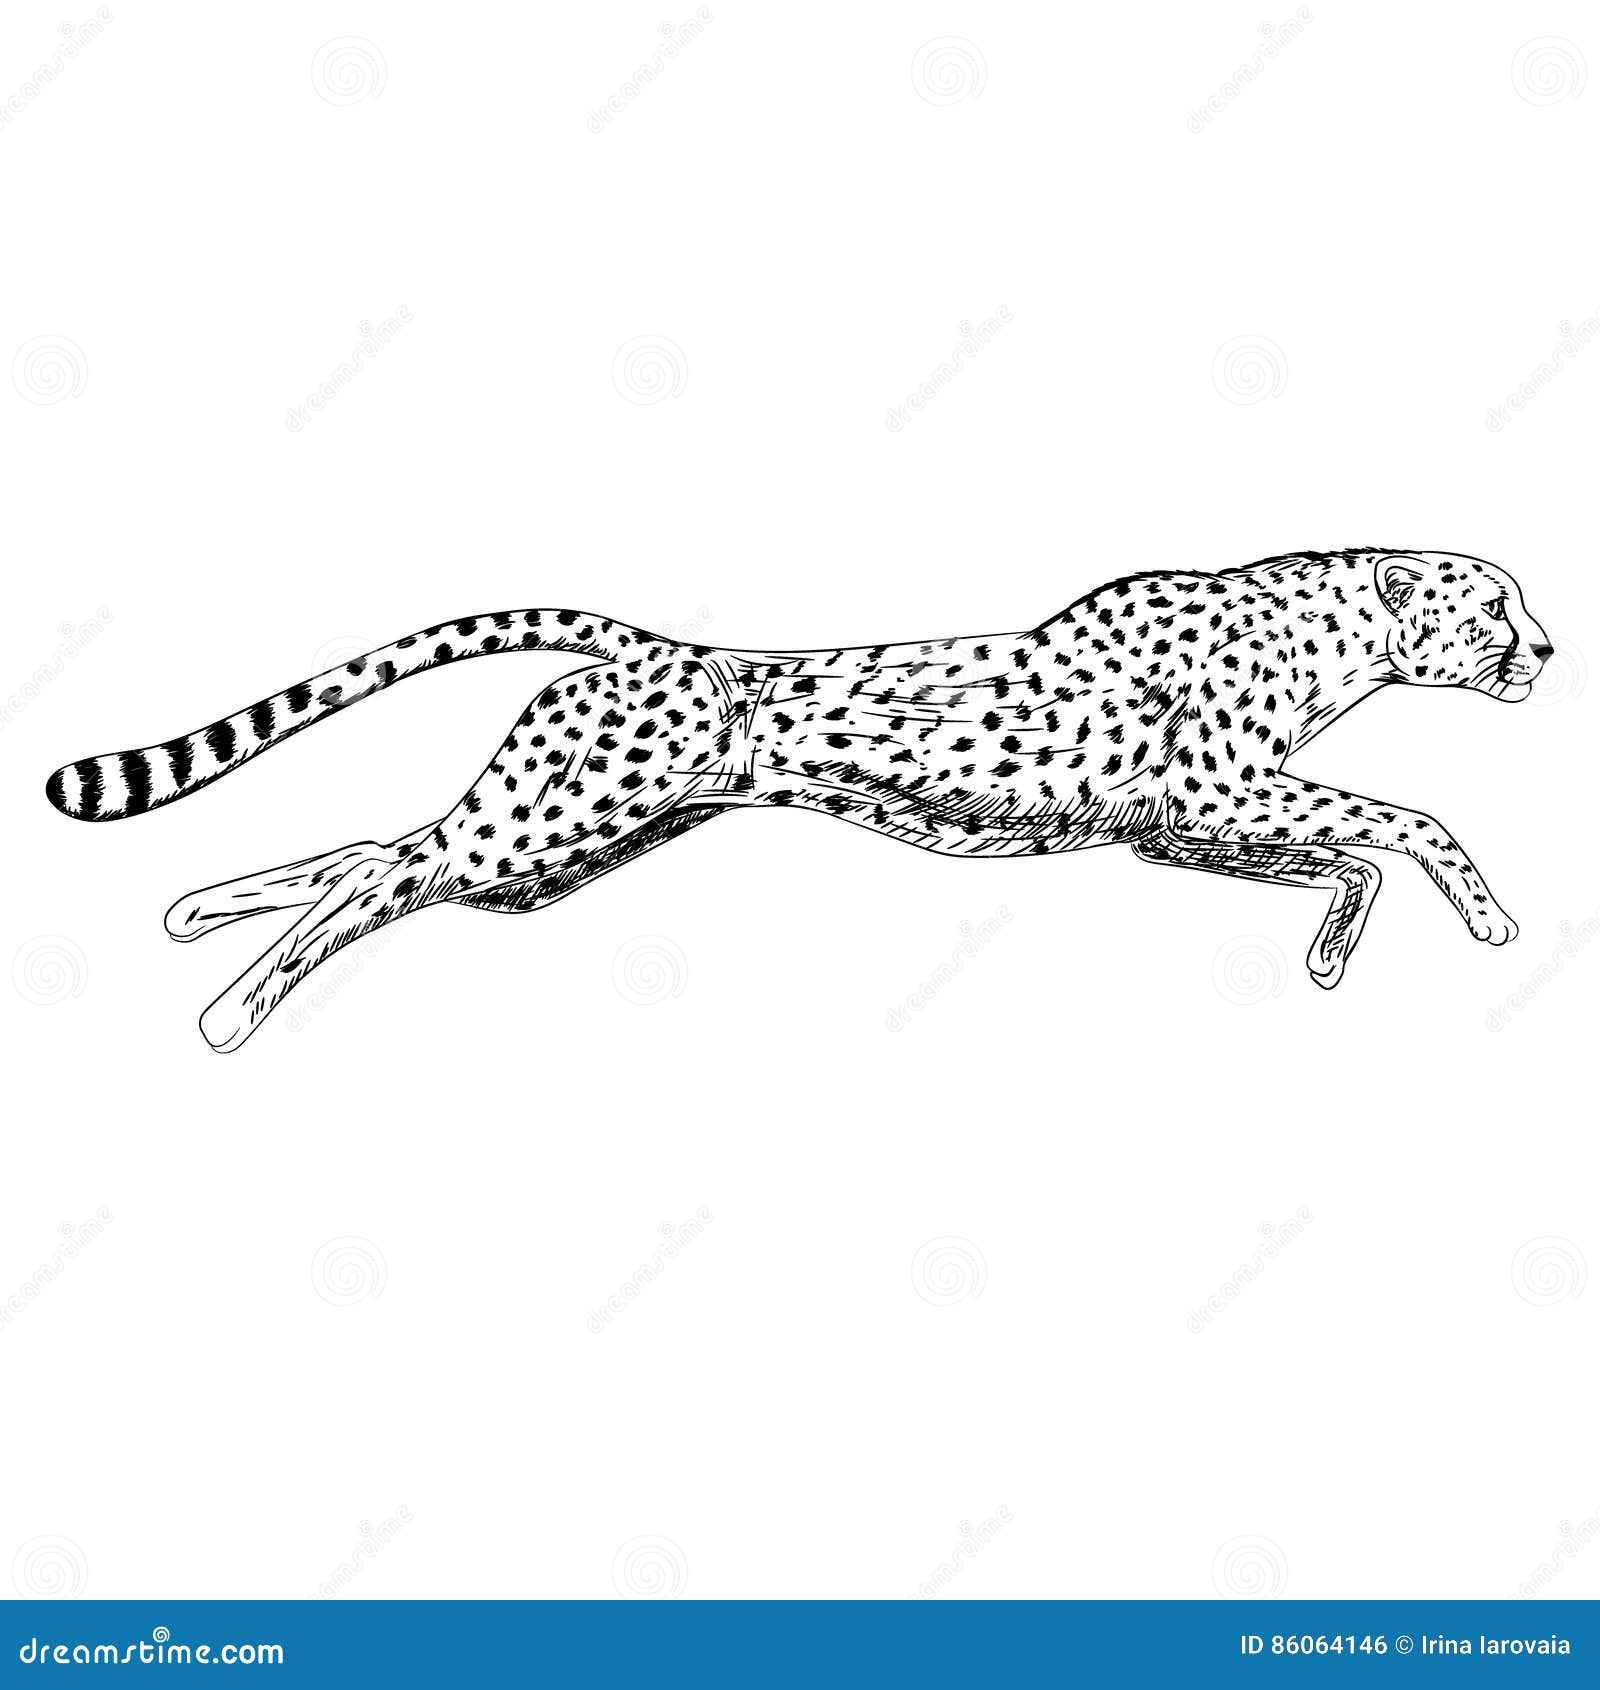 Amazon.com: Hell For Leather, cheetah pencil drawing Realistic Wildlife  Illustration by Peter Williams, Gallery-Wrapped Canvas PrintImagekind Wall  Decor | 16x8